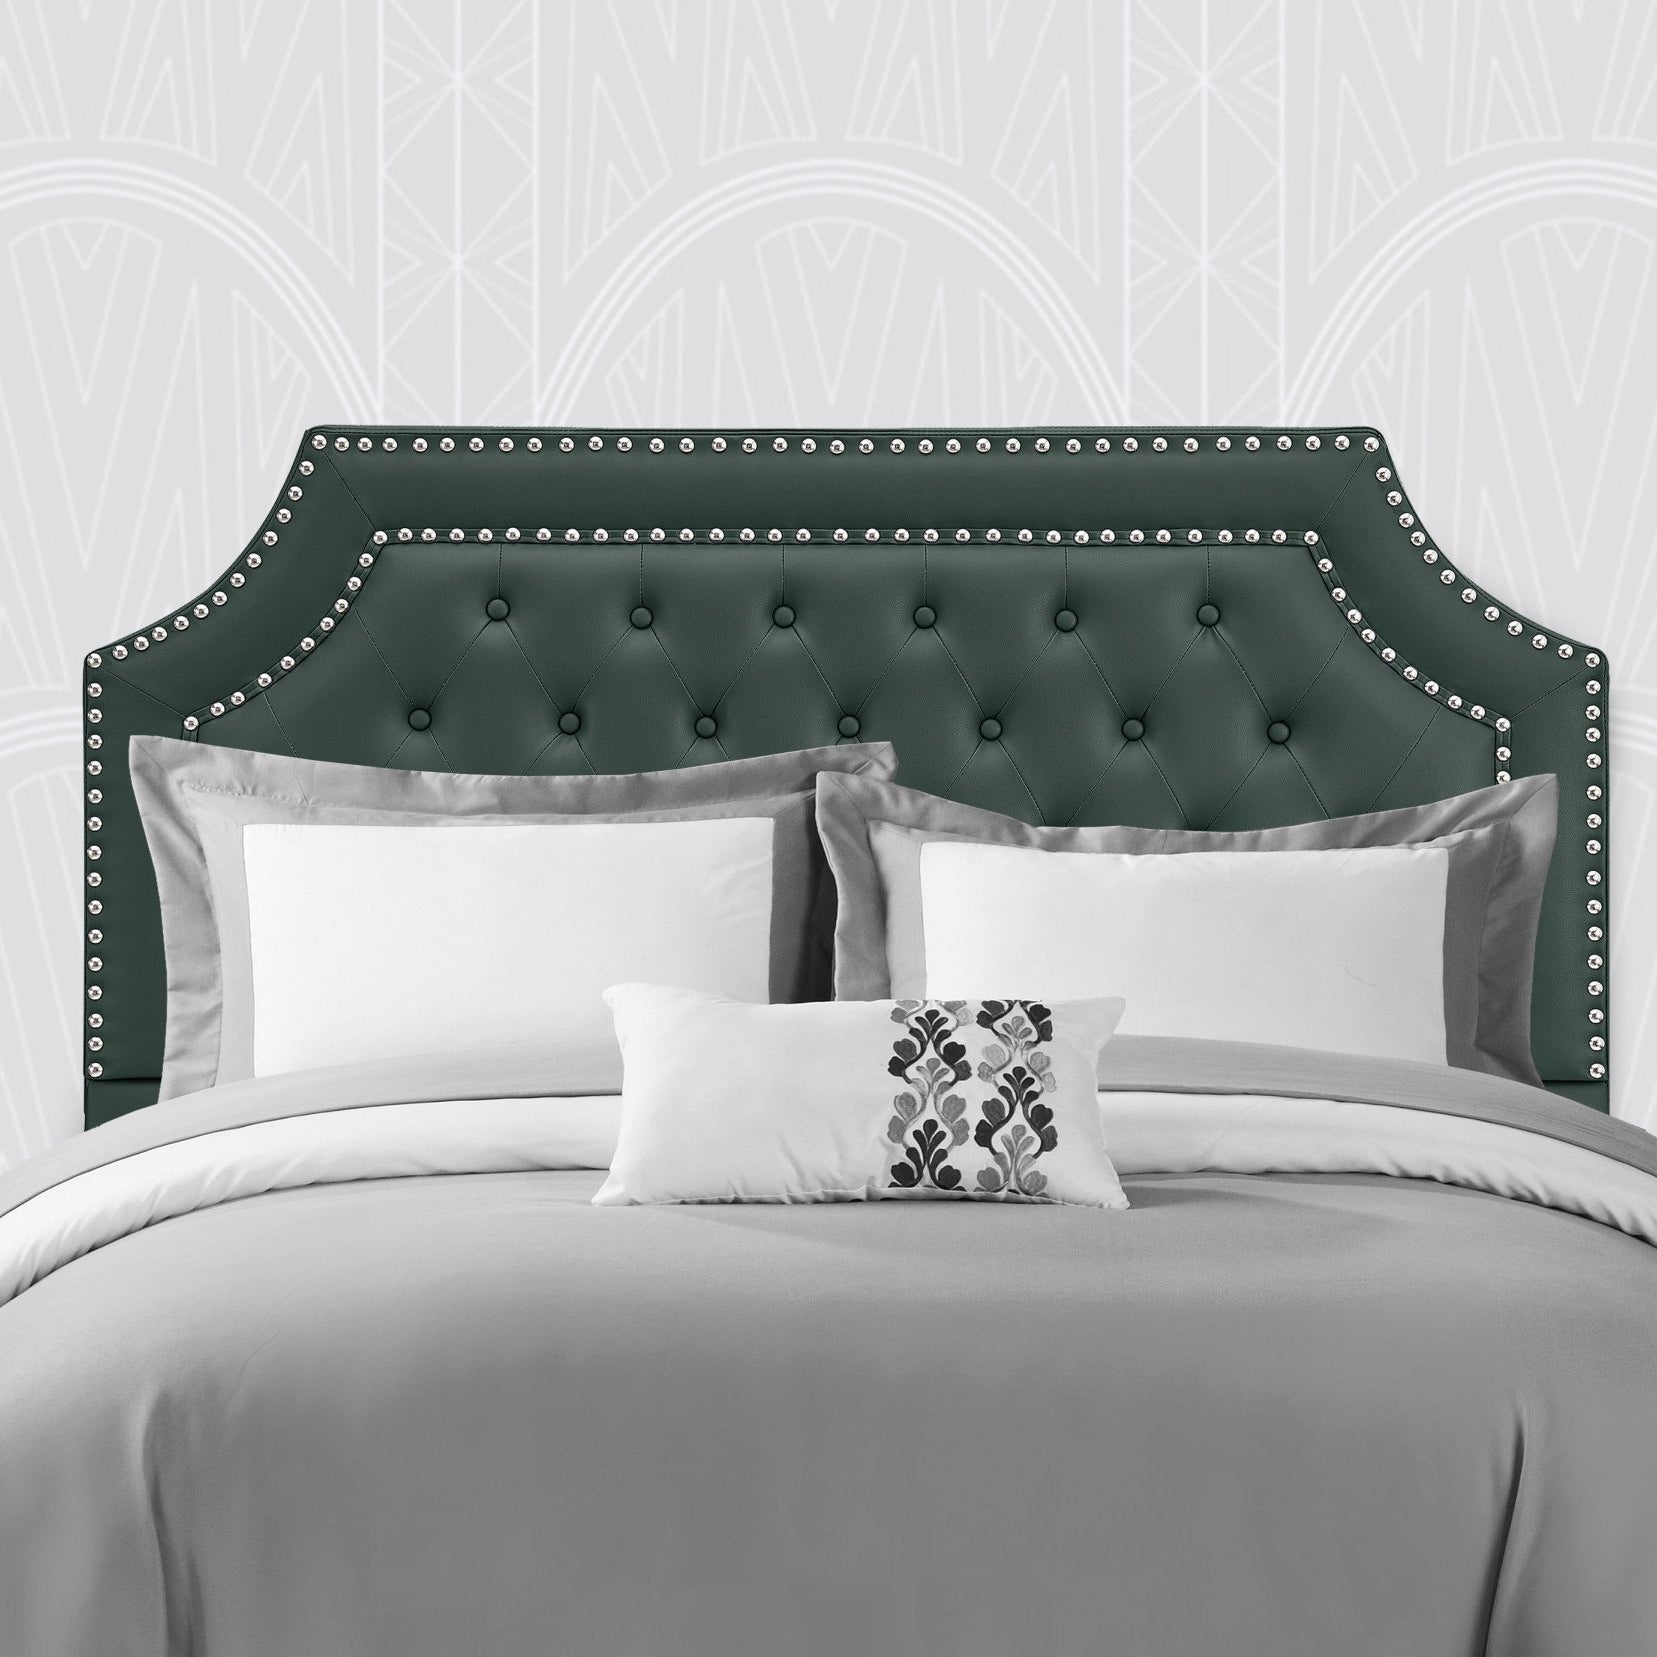 Malan Tufted Faux Leather Headboard For Bed